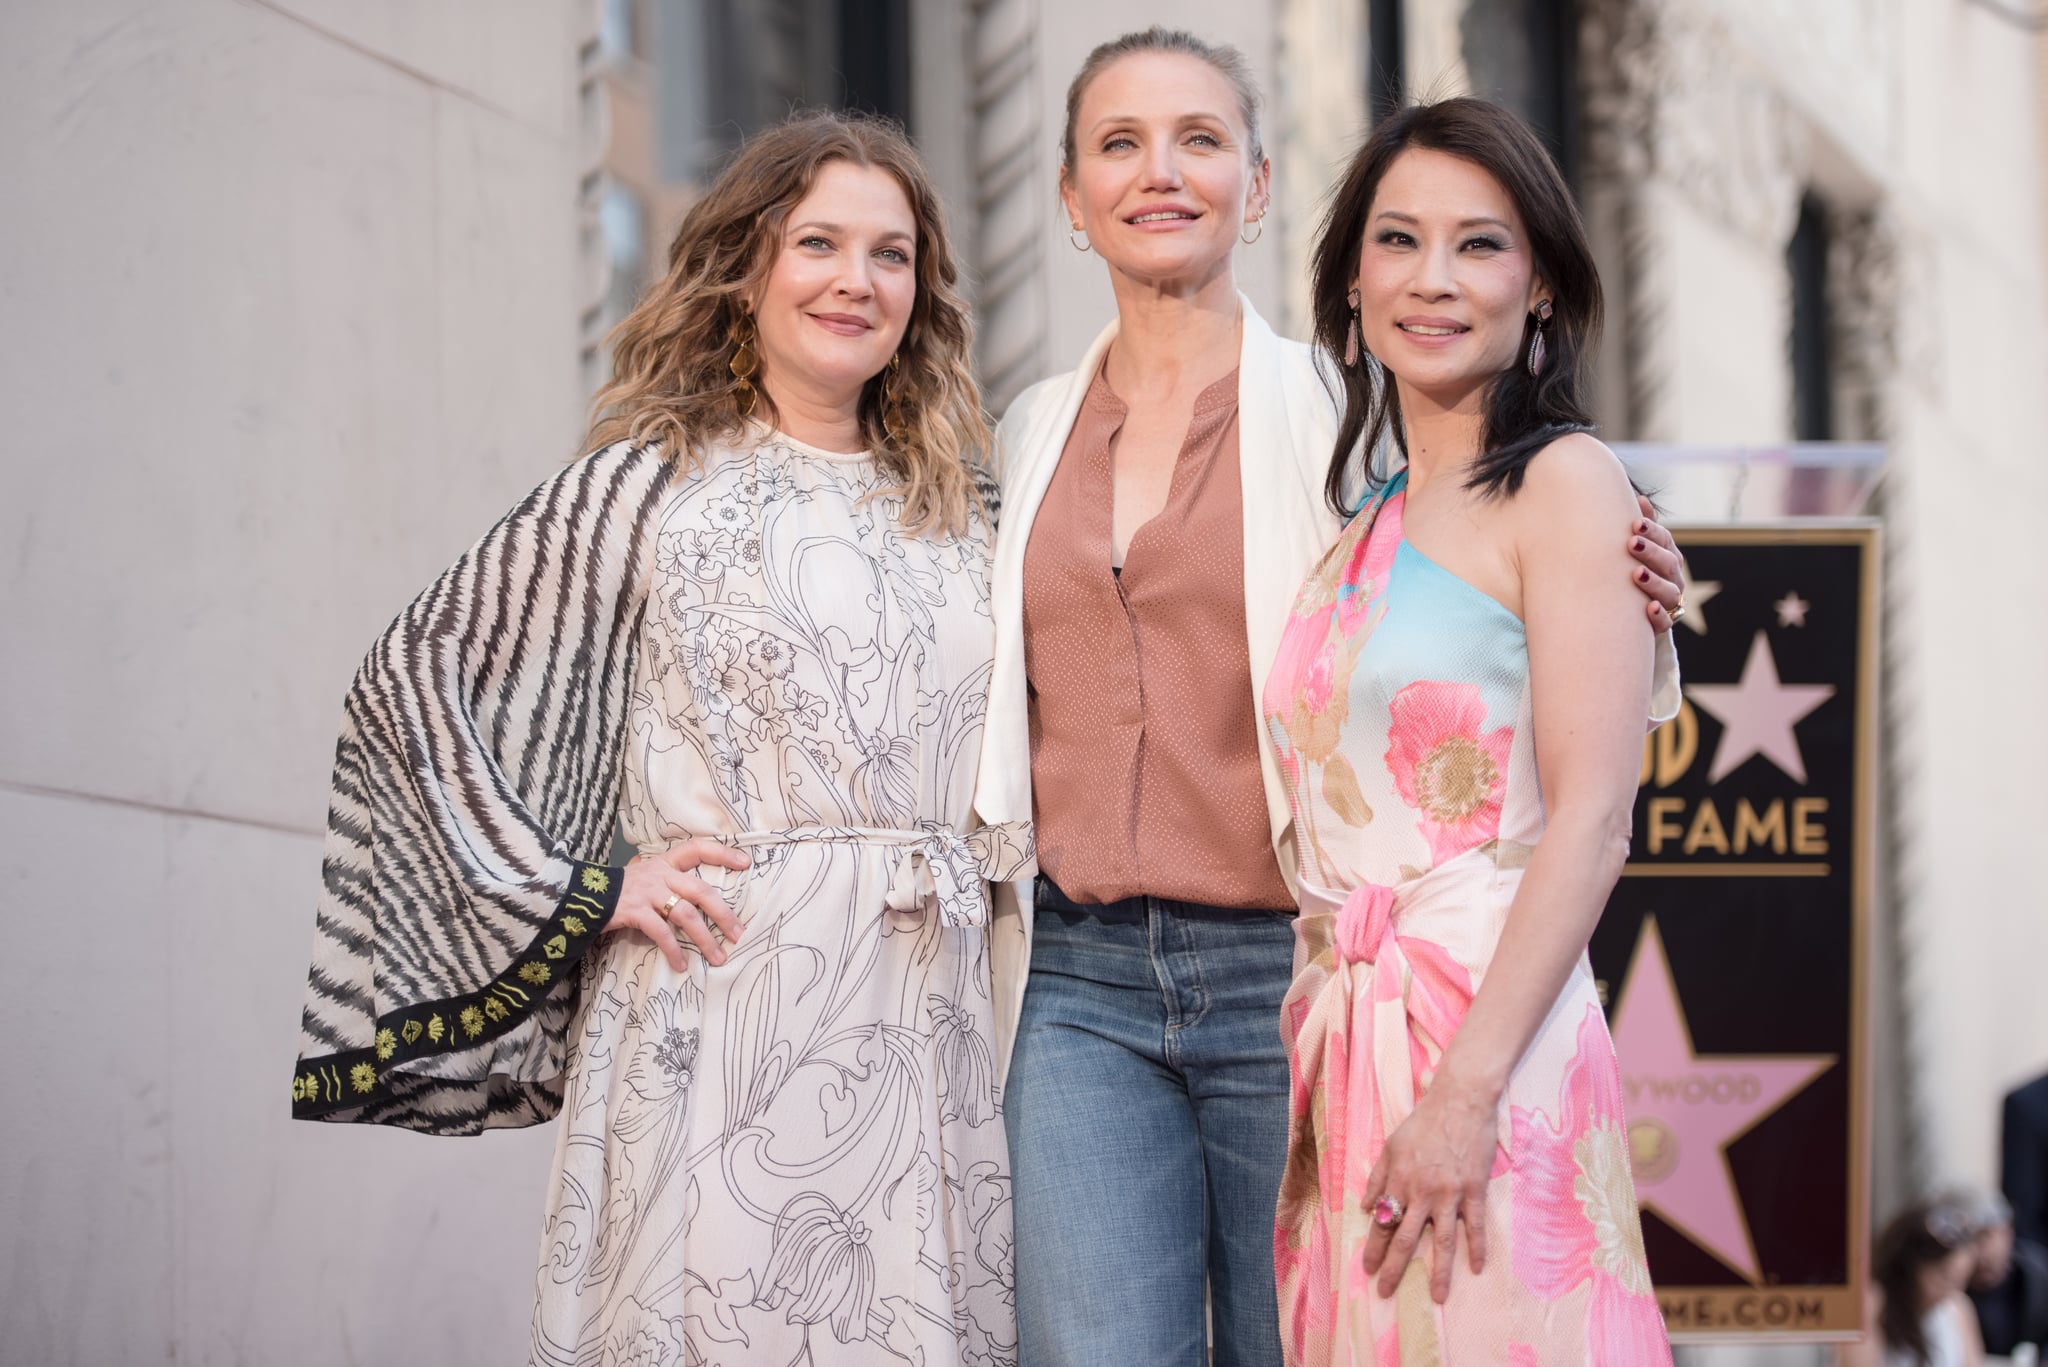 HOLLYWOOD, CALIFORNIA - MAY 01: Drew Barrymore, Cameron Diaz, and Lucy Liu at Lucy Liu's Hollywood Walk of Fame star ceremony on May 01, 2019 in Hollywood, California. (Photo by Morgan Lieberman/FilmMagic)